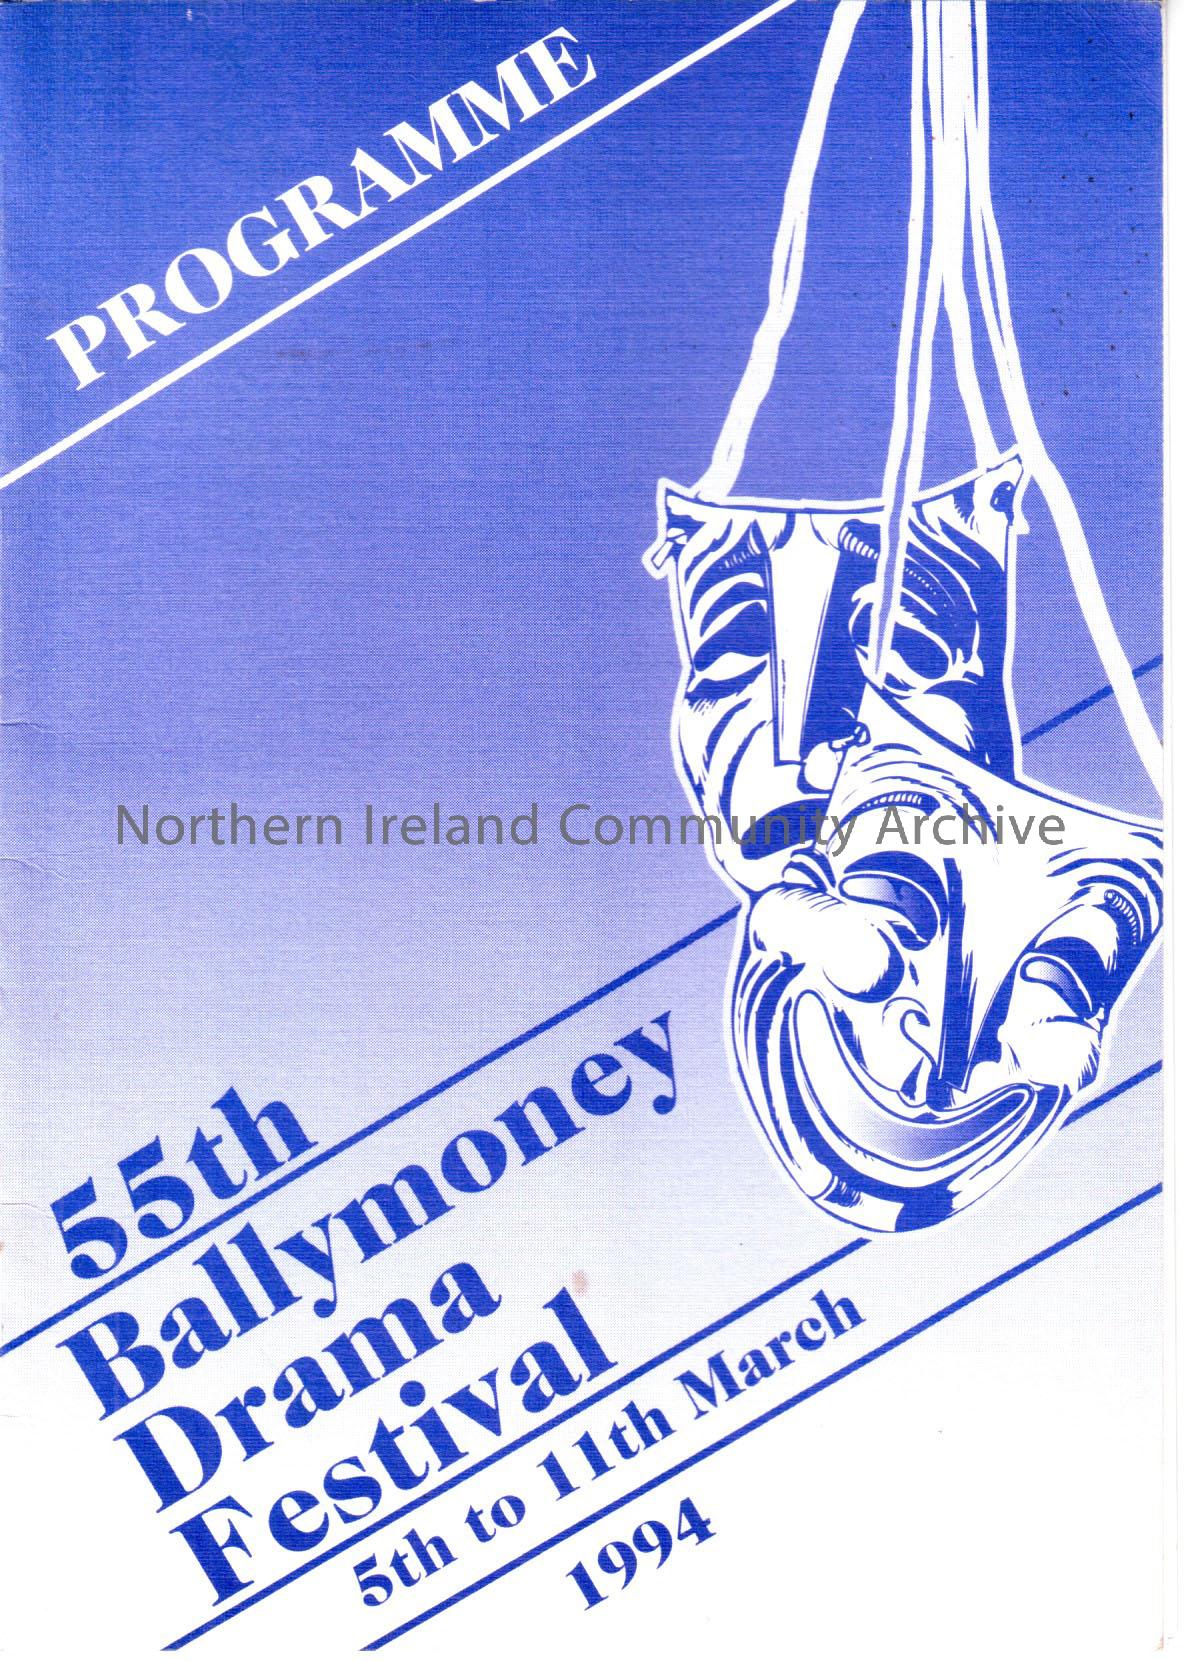 Programme of 55th Ballymoney Drama Festival,1994 5th to 11th March – 2011.36